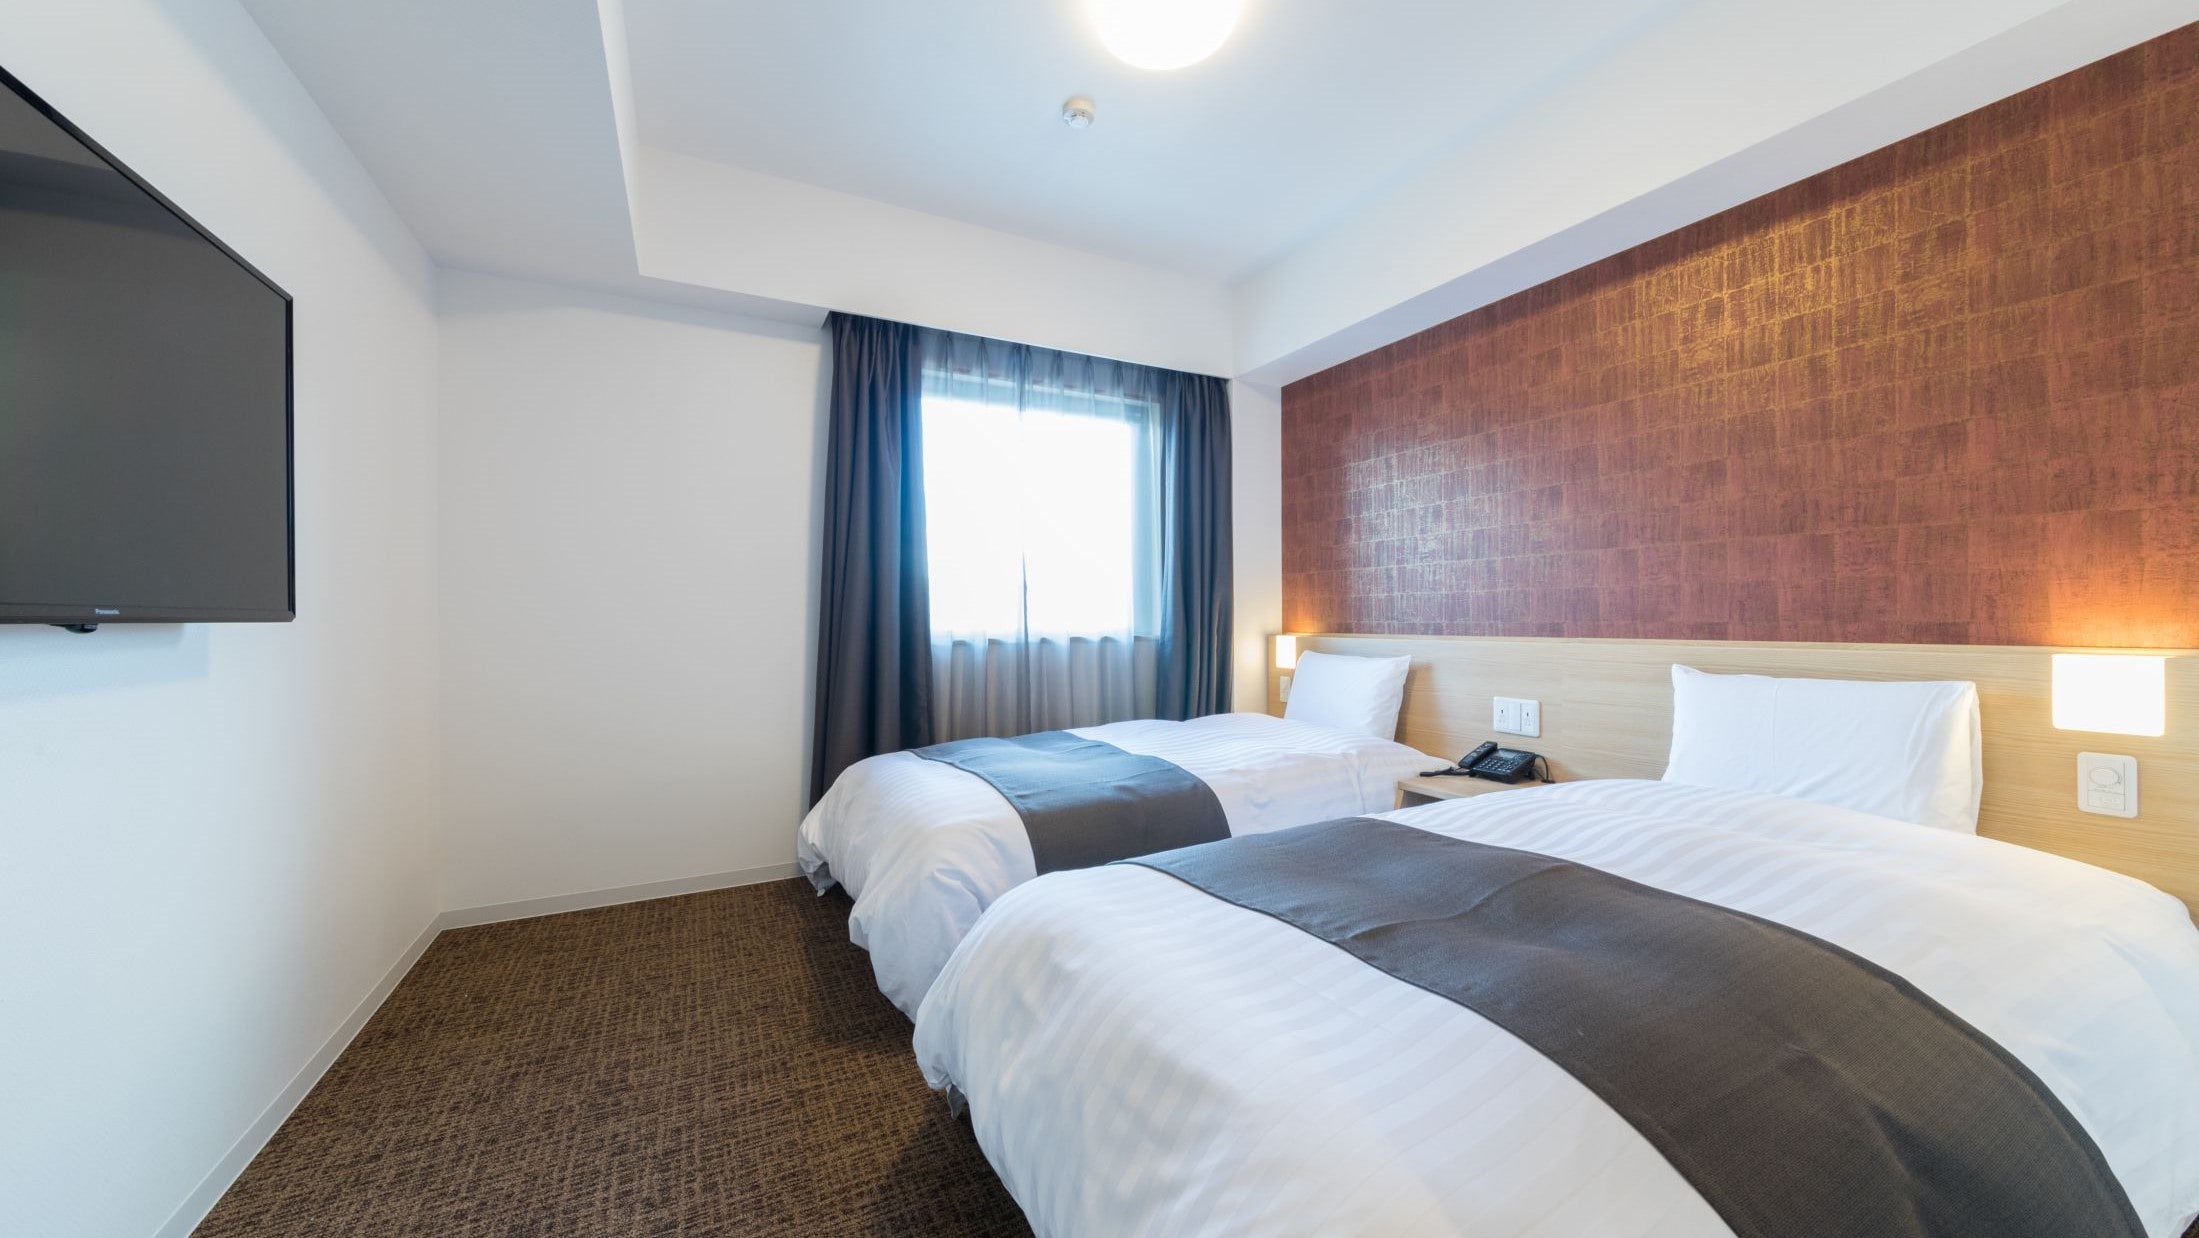 ◇ Non-smoking ◇ Twin room Approximately 18.3-19.2 square meters Bed 110 & times; 195 cm * 7-12 floor